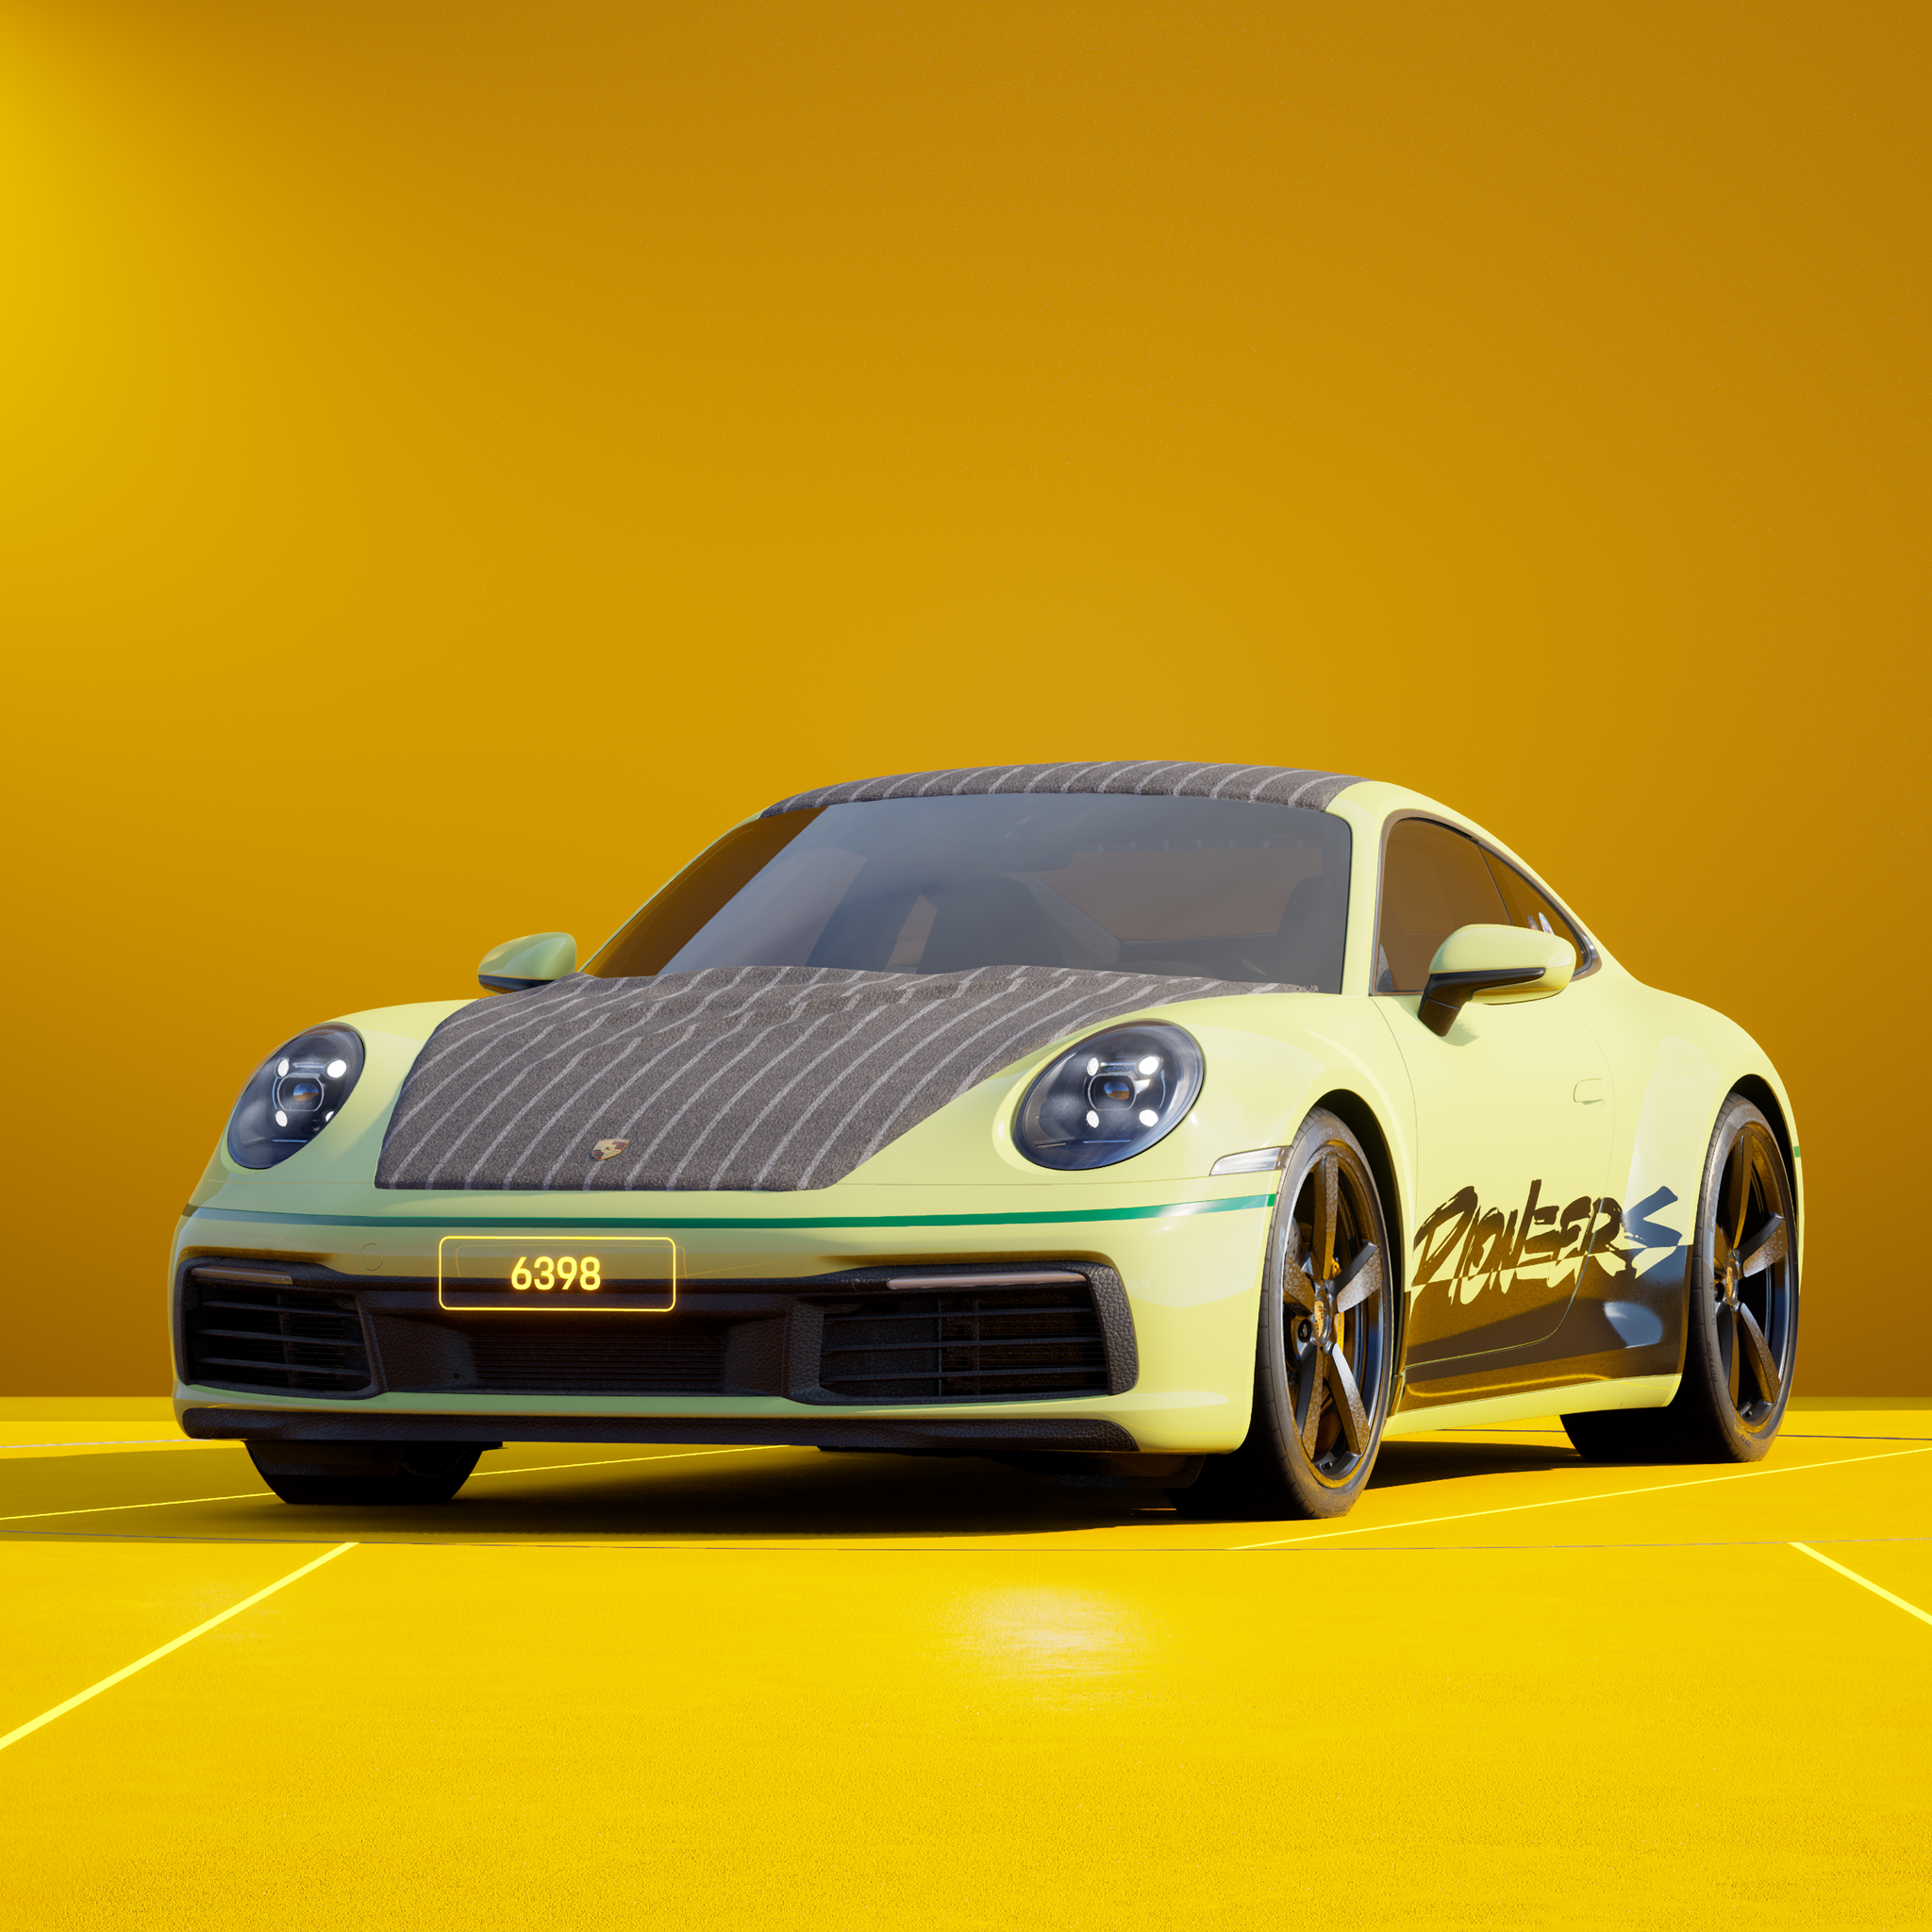 The PORSCHΞ 911 6398 image in phase